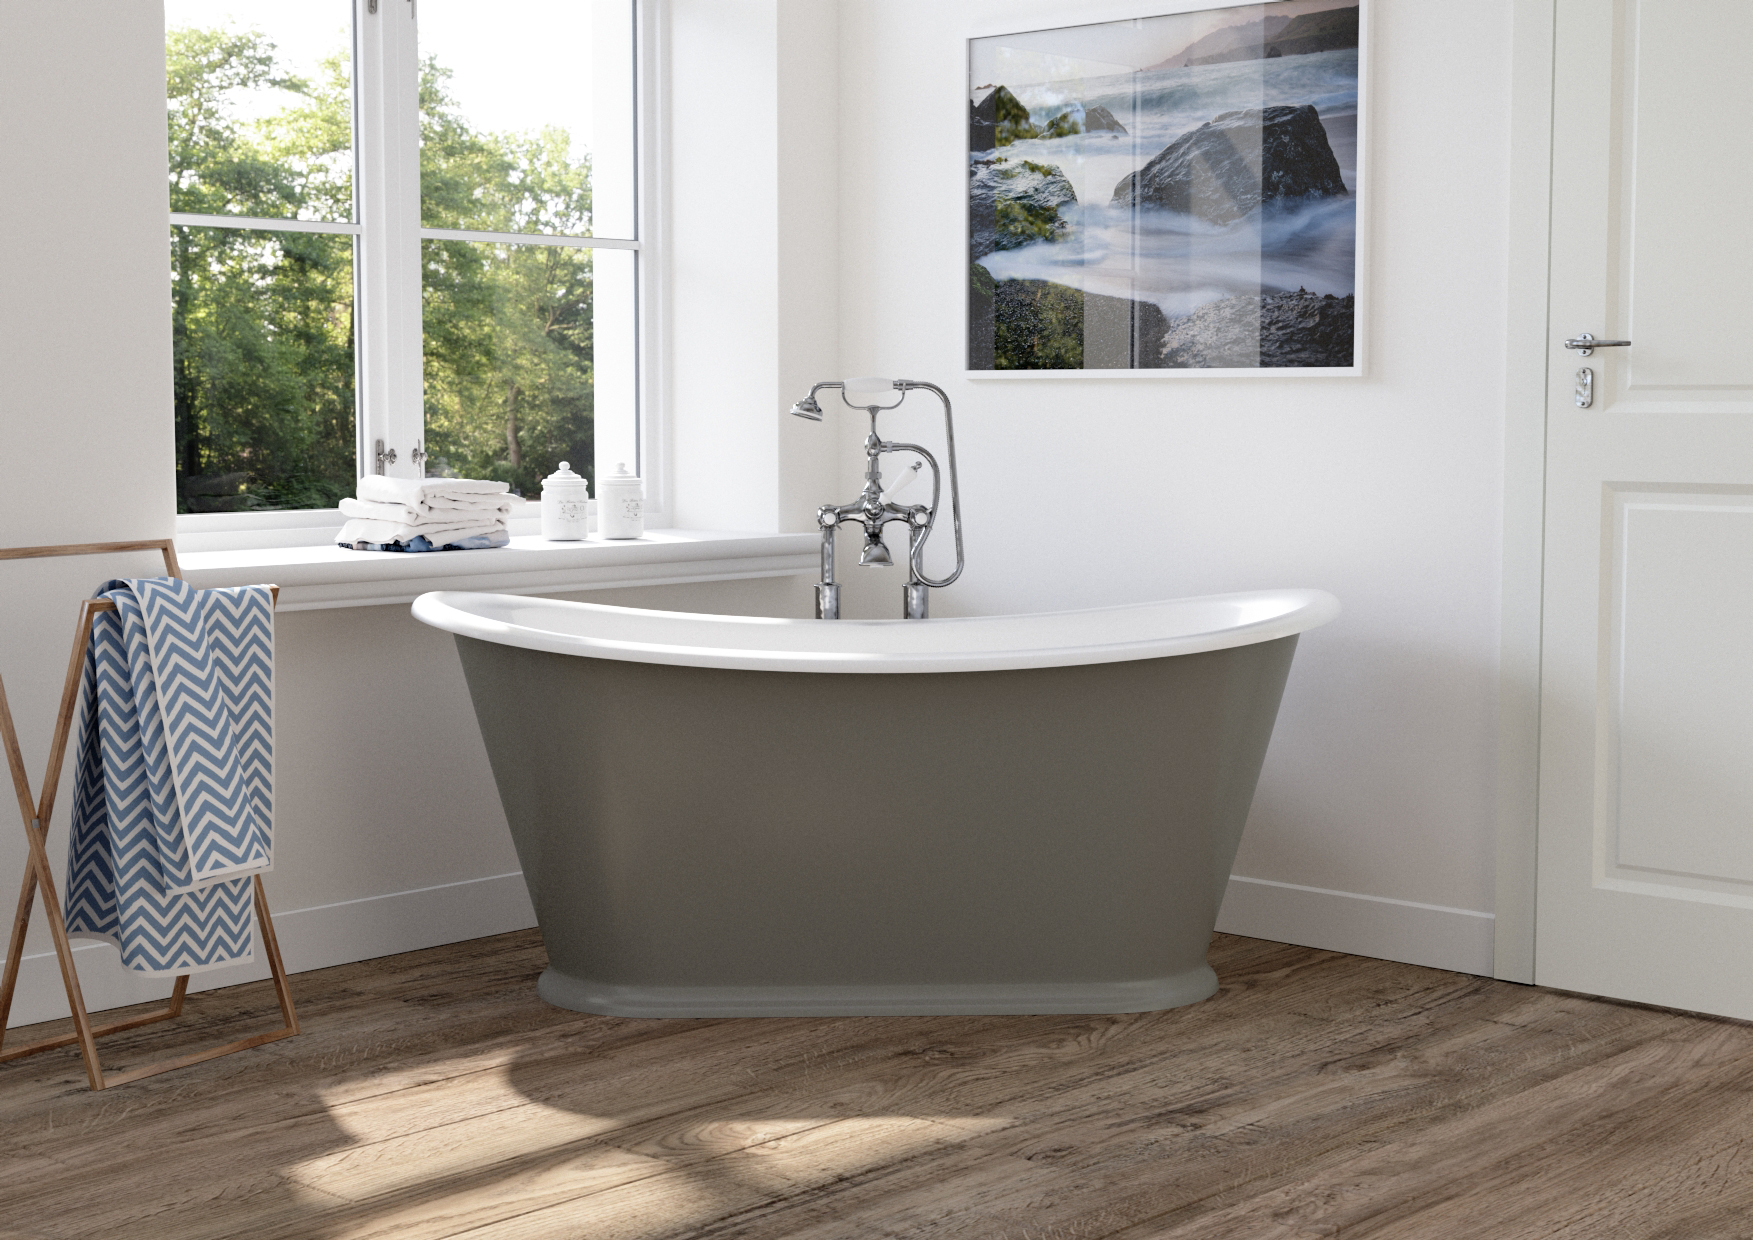 Hurlingham Bathroom Range Of Traditional Cast Iron Roll Top Baths Available at UKAA